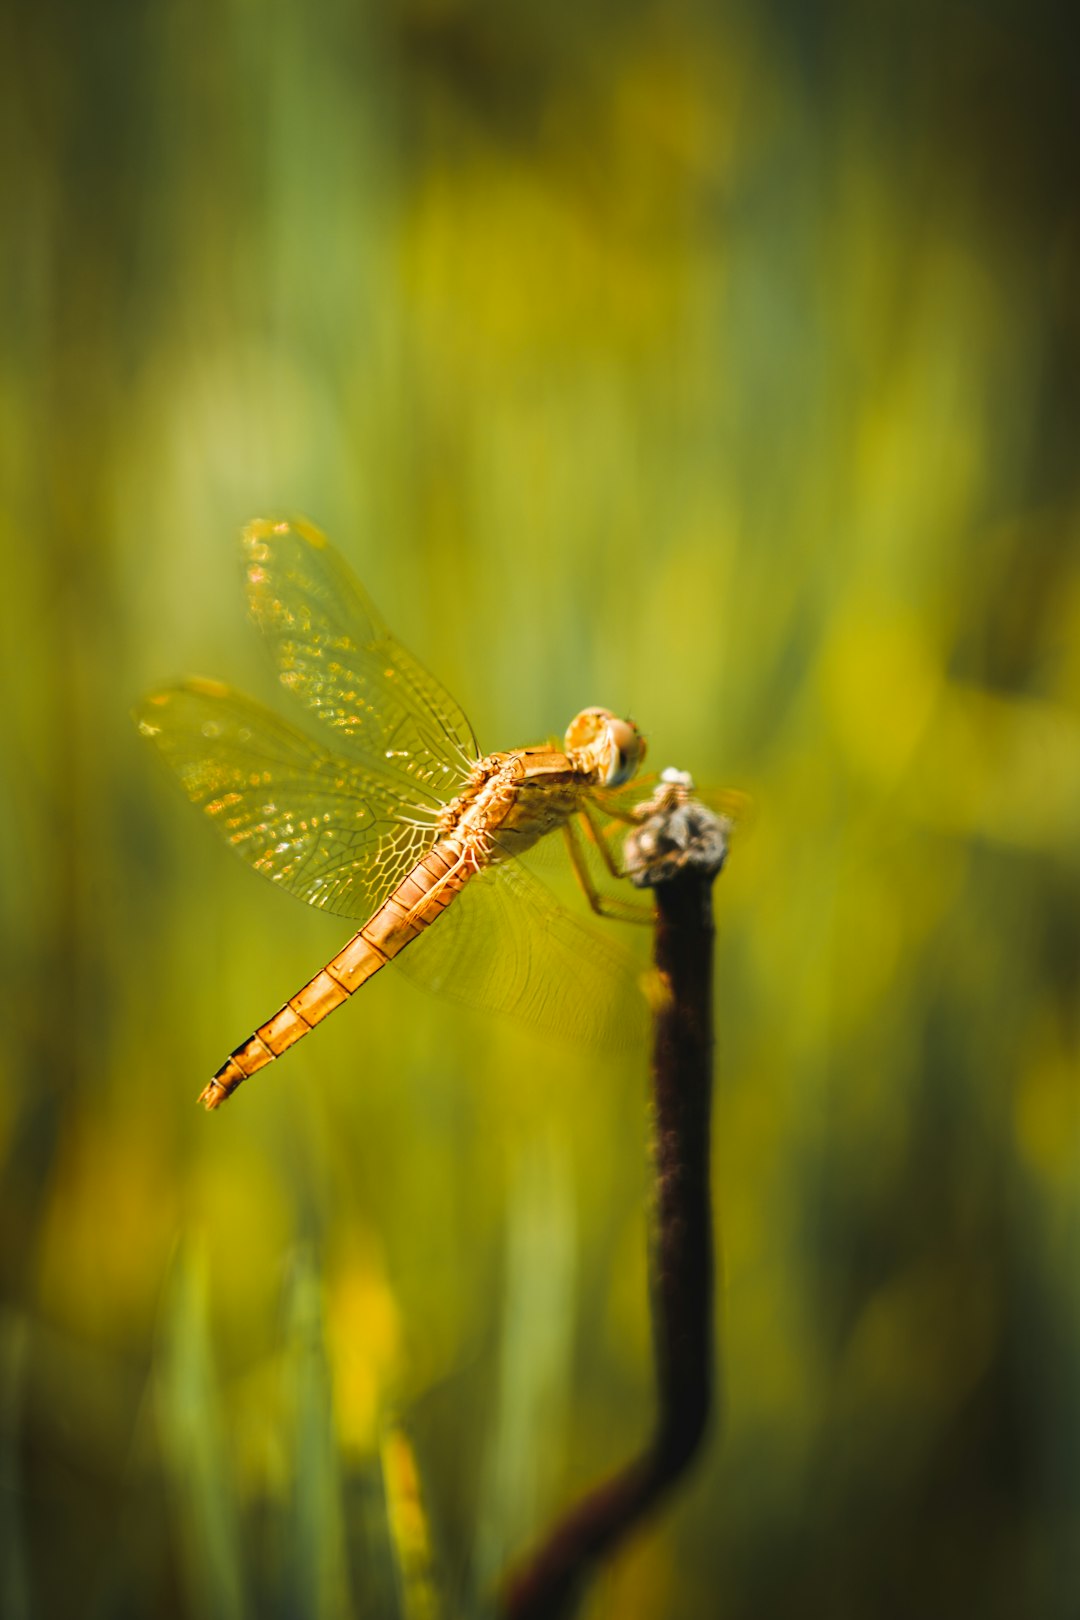 brown dragonfly perched on brown stick in close up photography during daytime